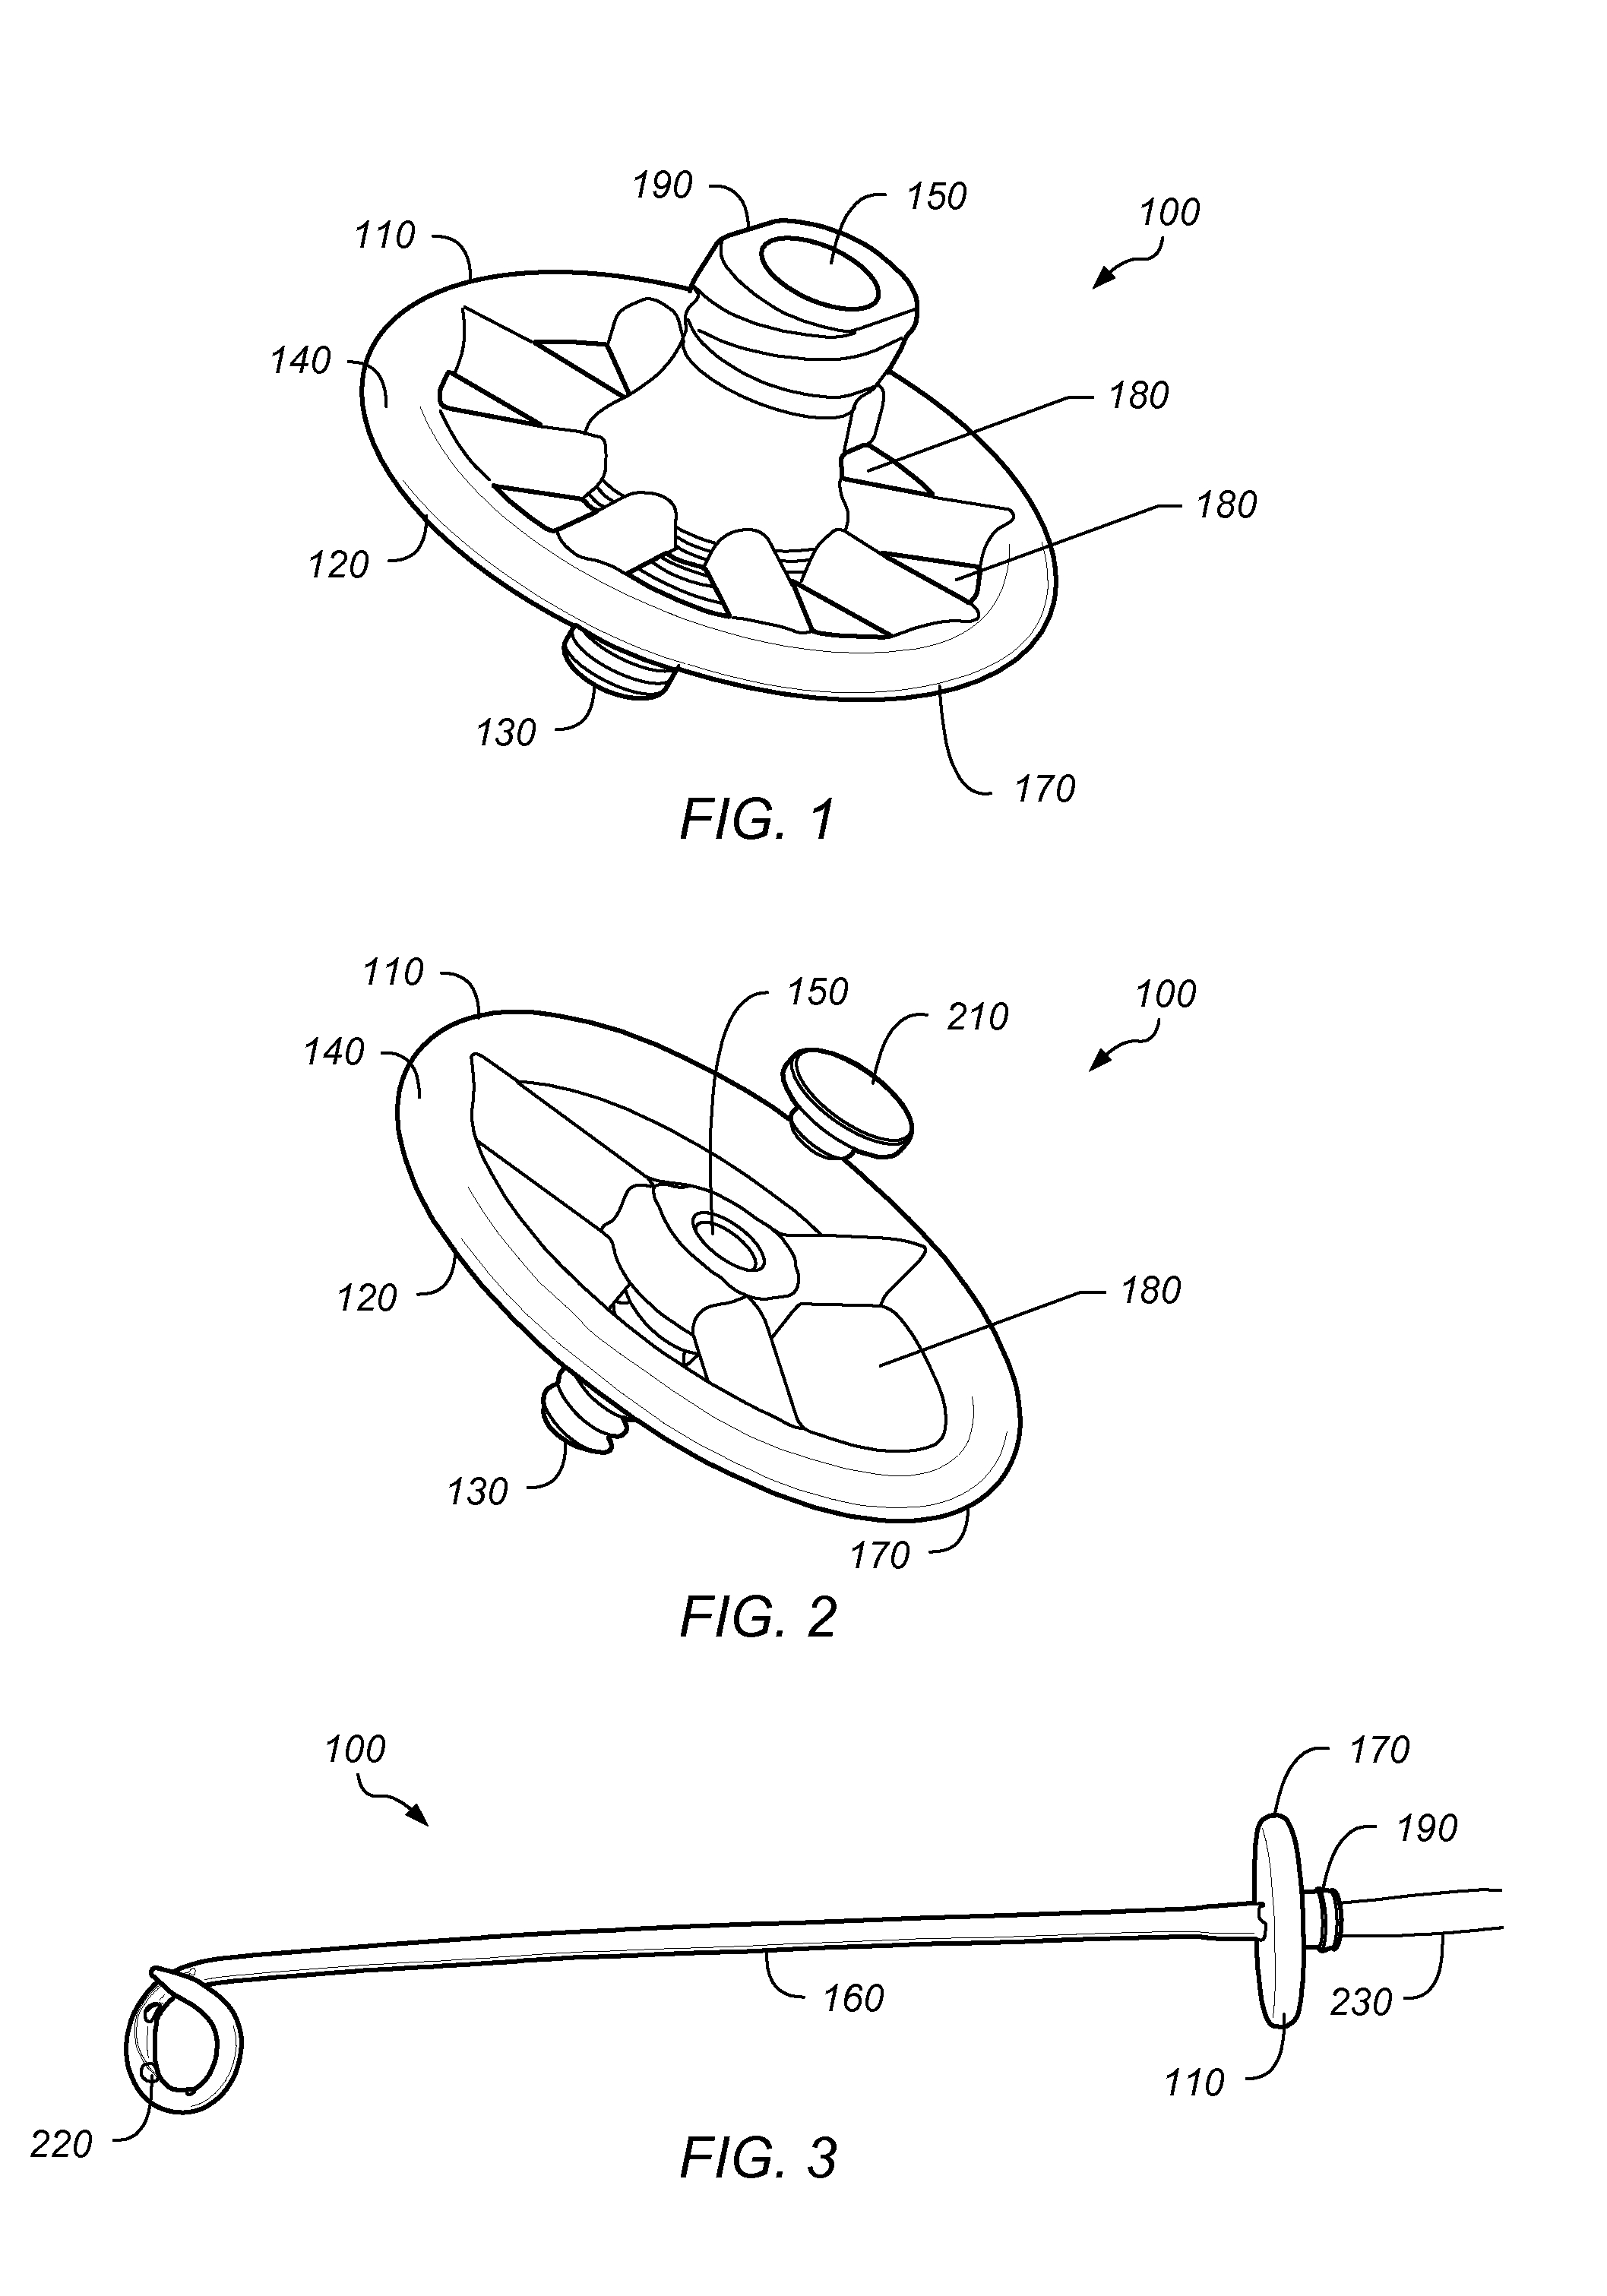 External fixation system for percutaneous drainage procedures